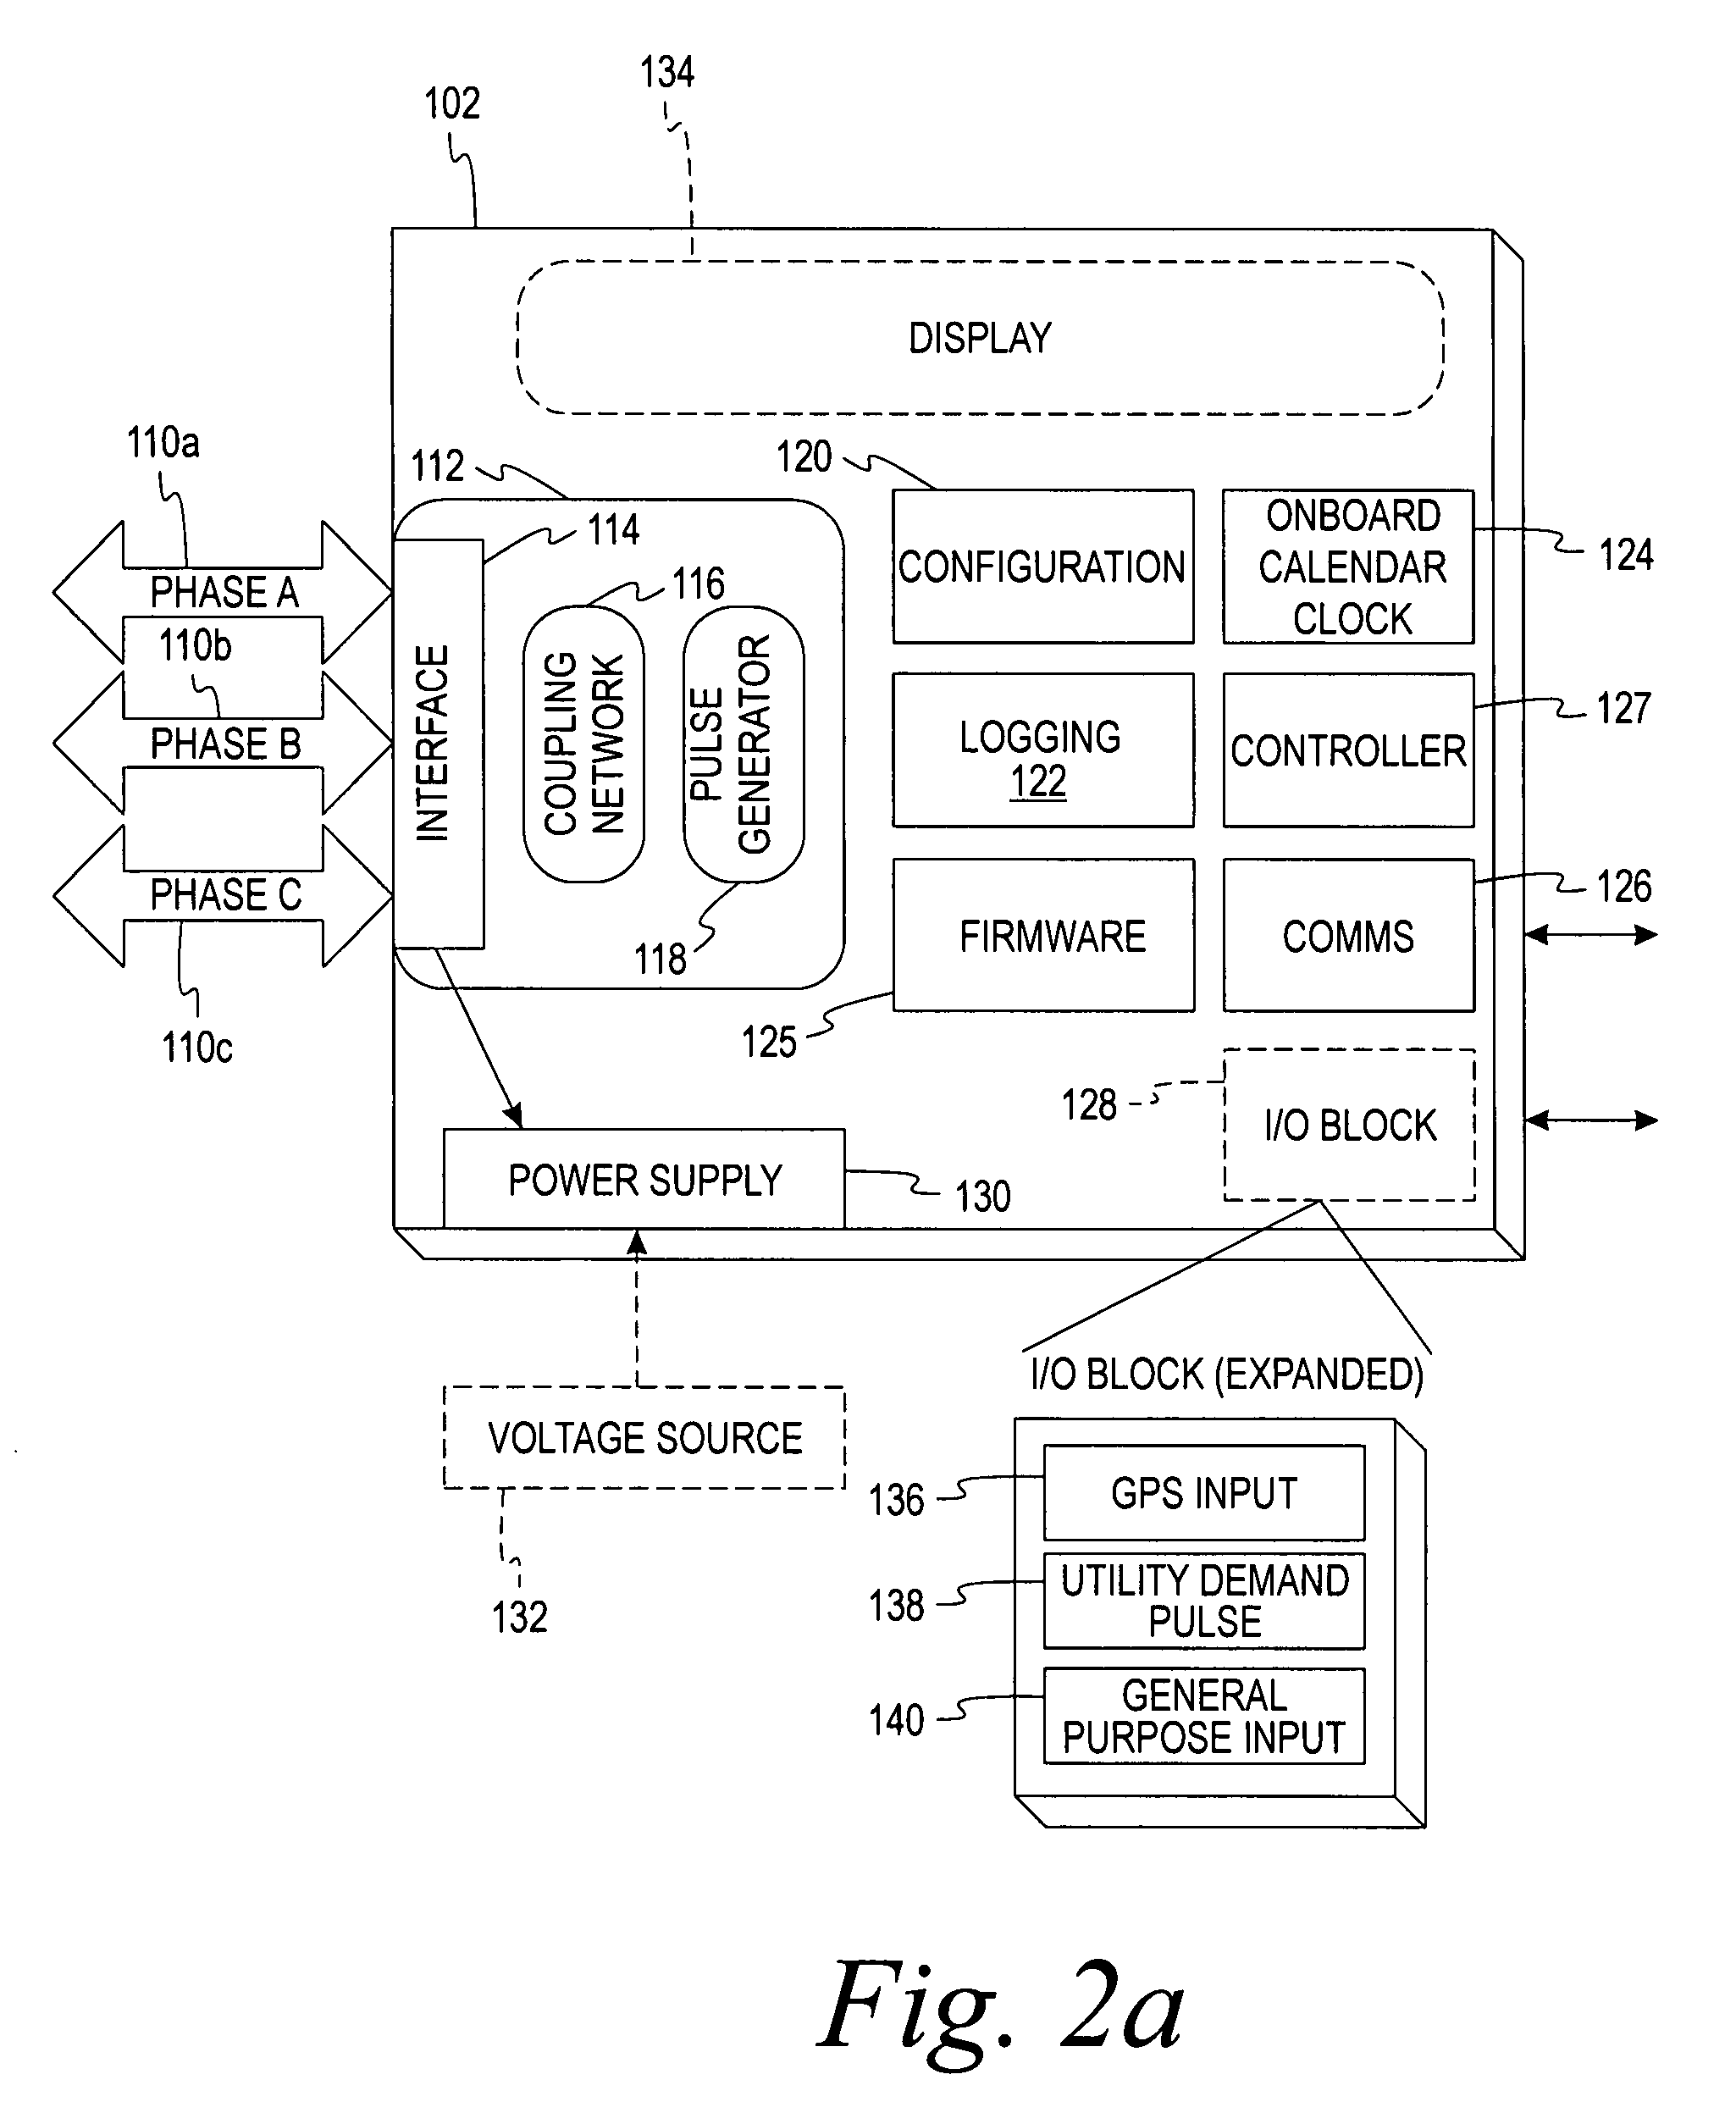 Method and apparatus for synchronizing data in utility system